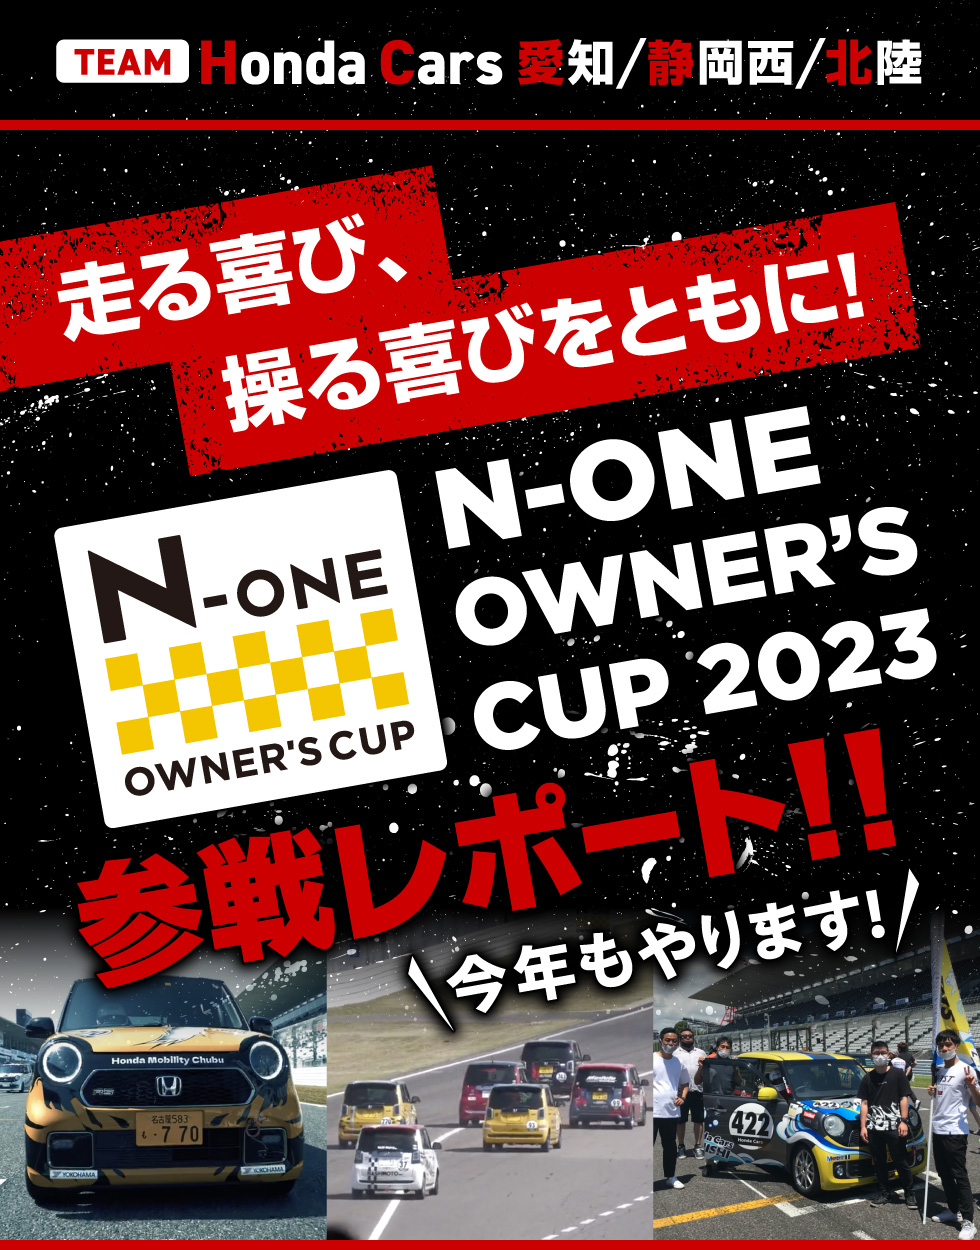 N-ONE OWNER'S CUP 2023